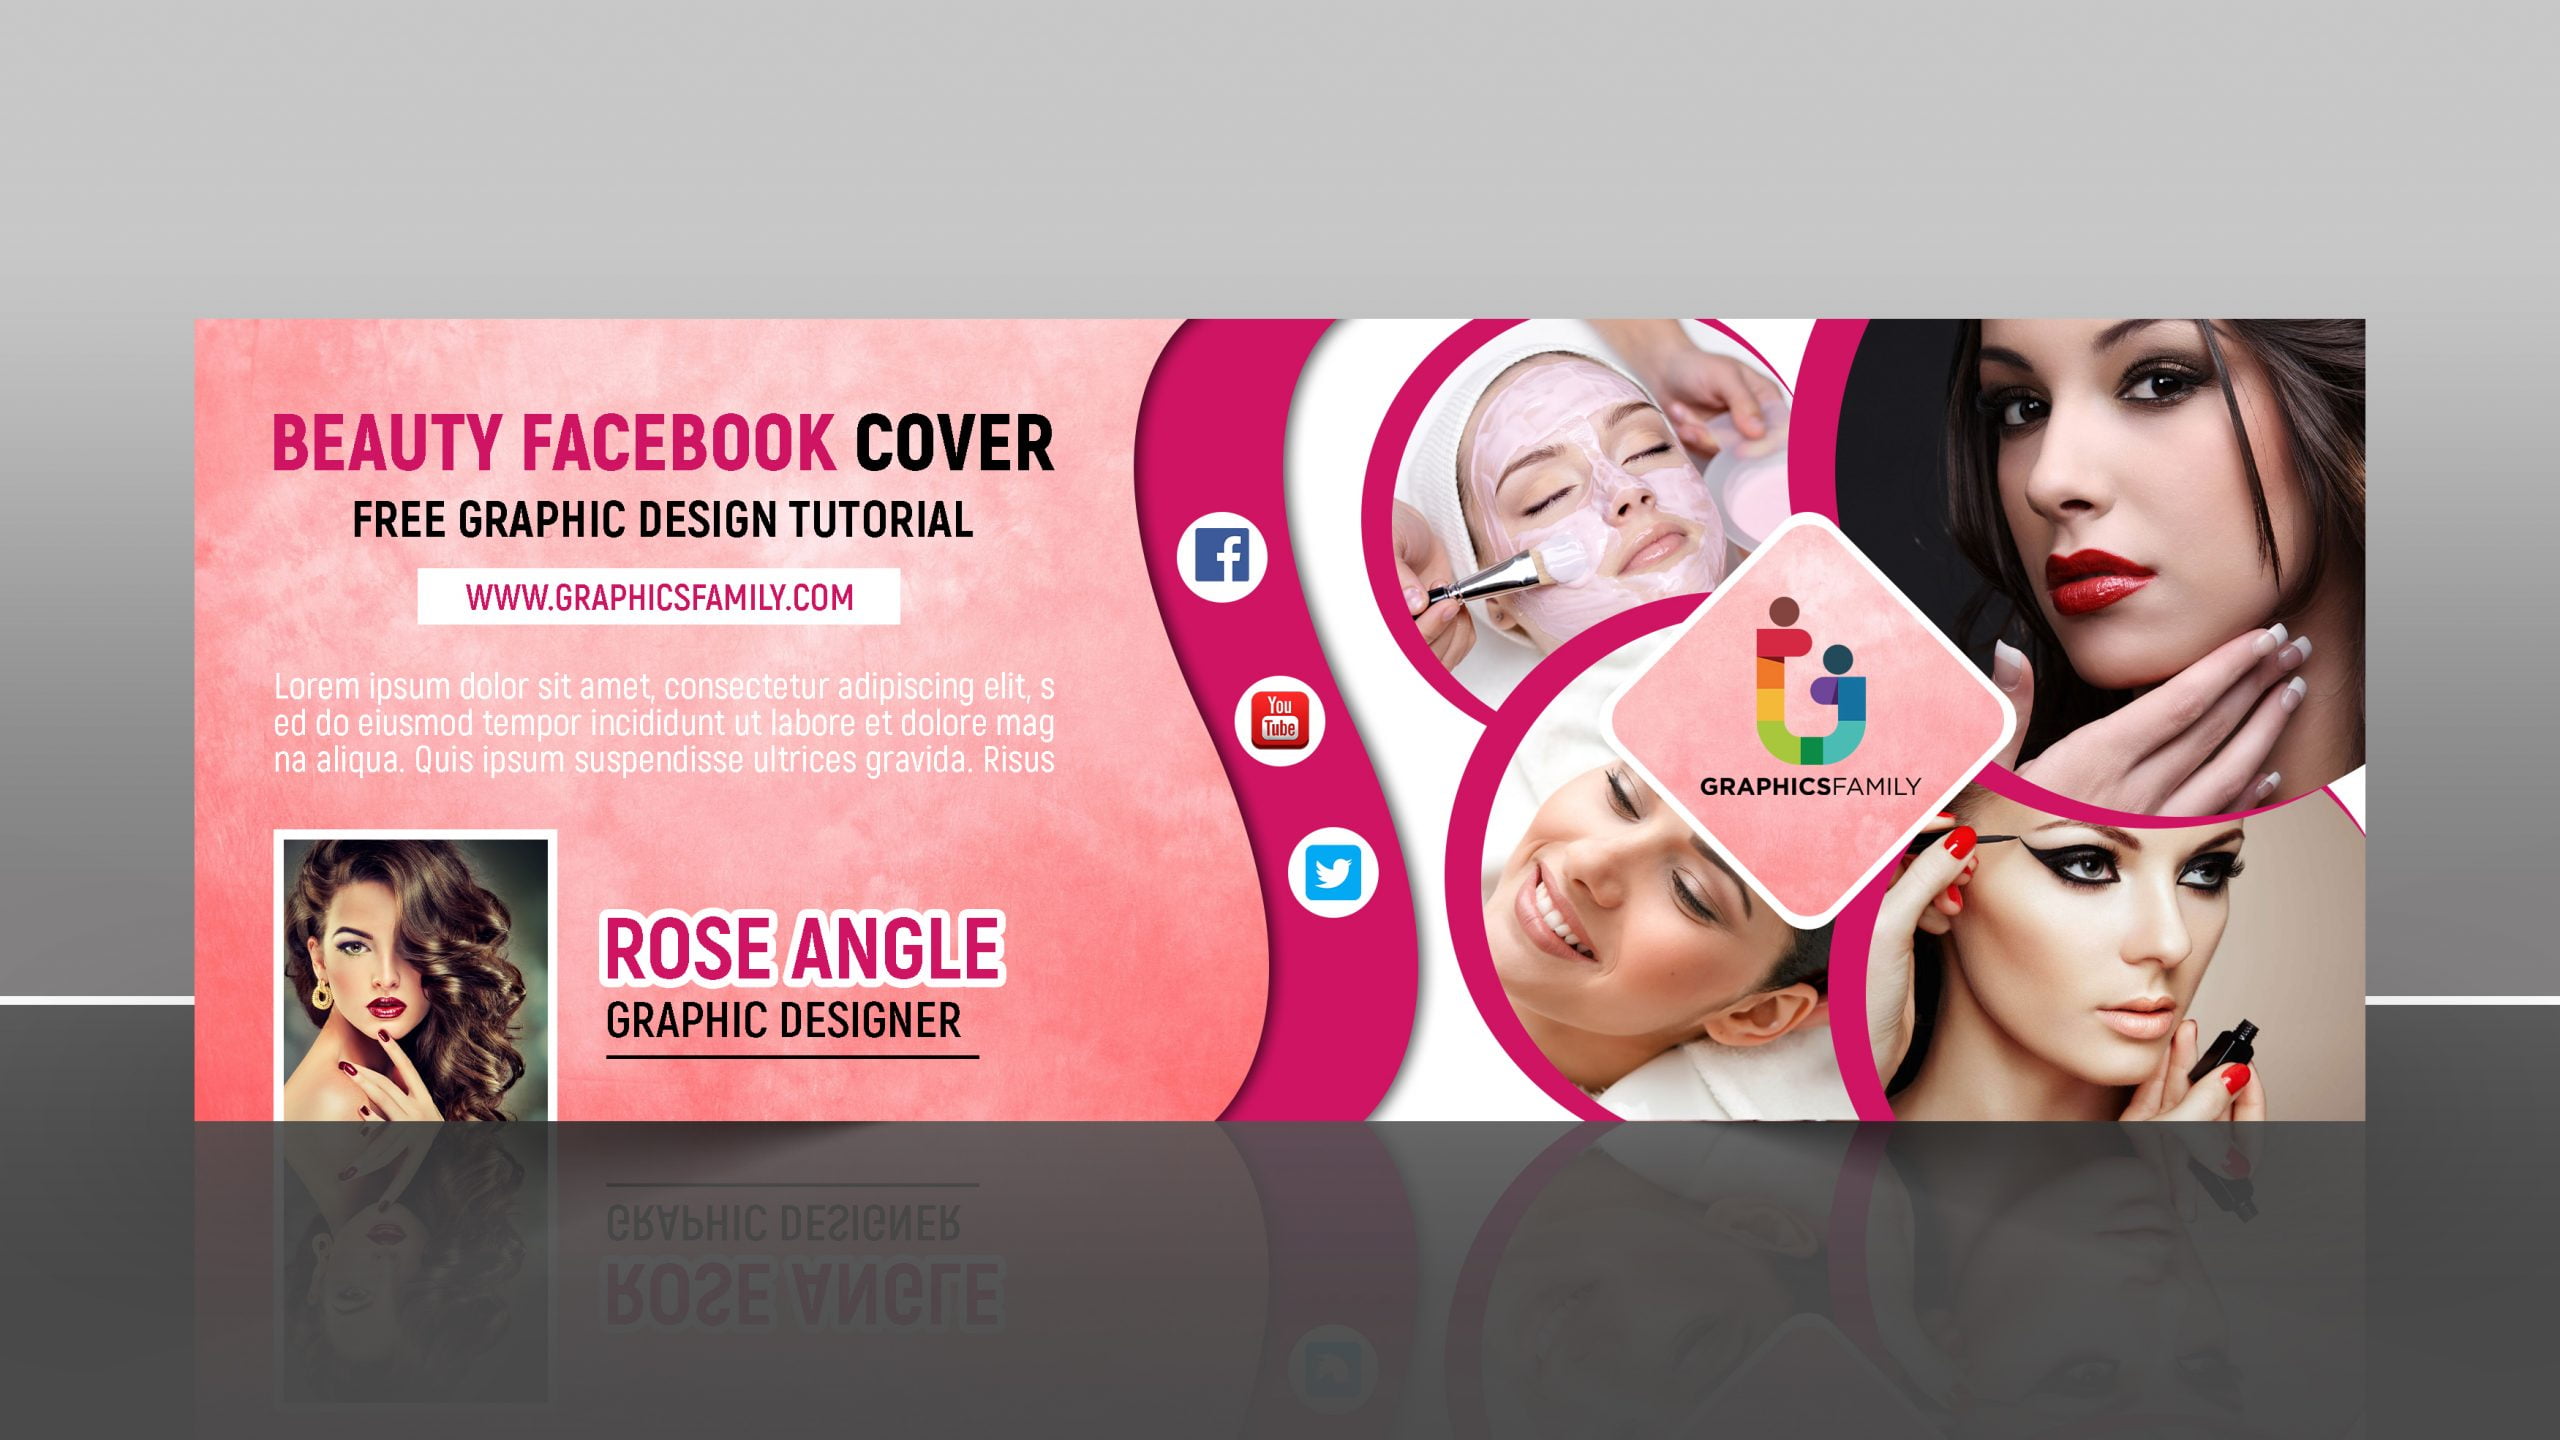 Beauty facebook cover design Free Template